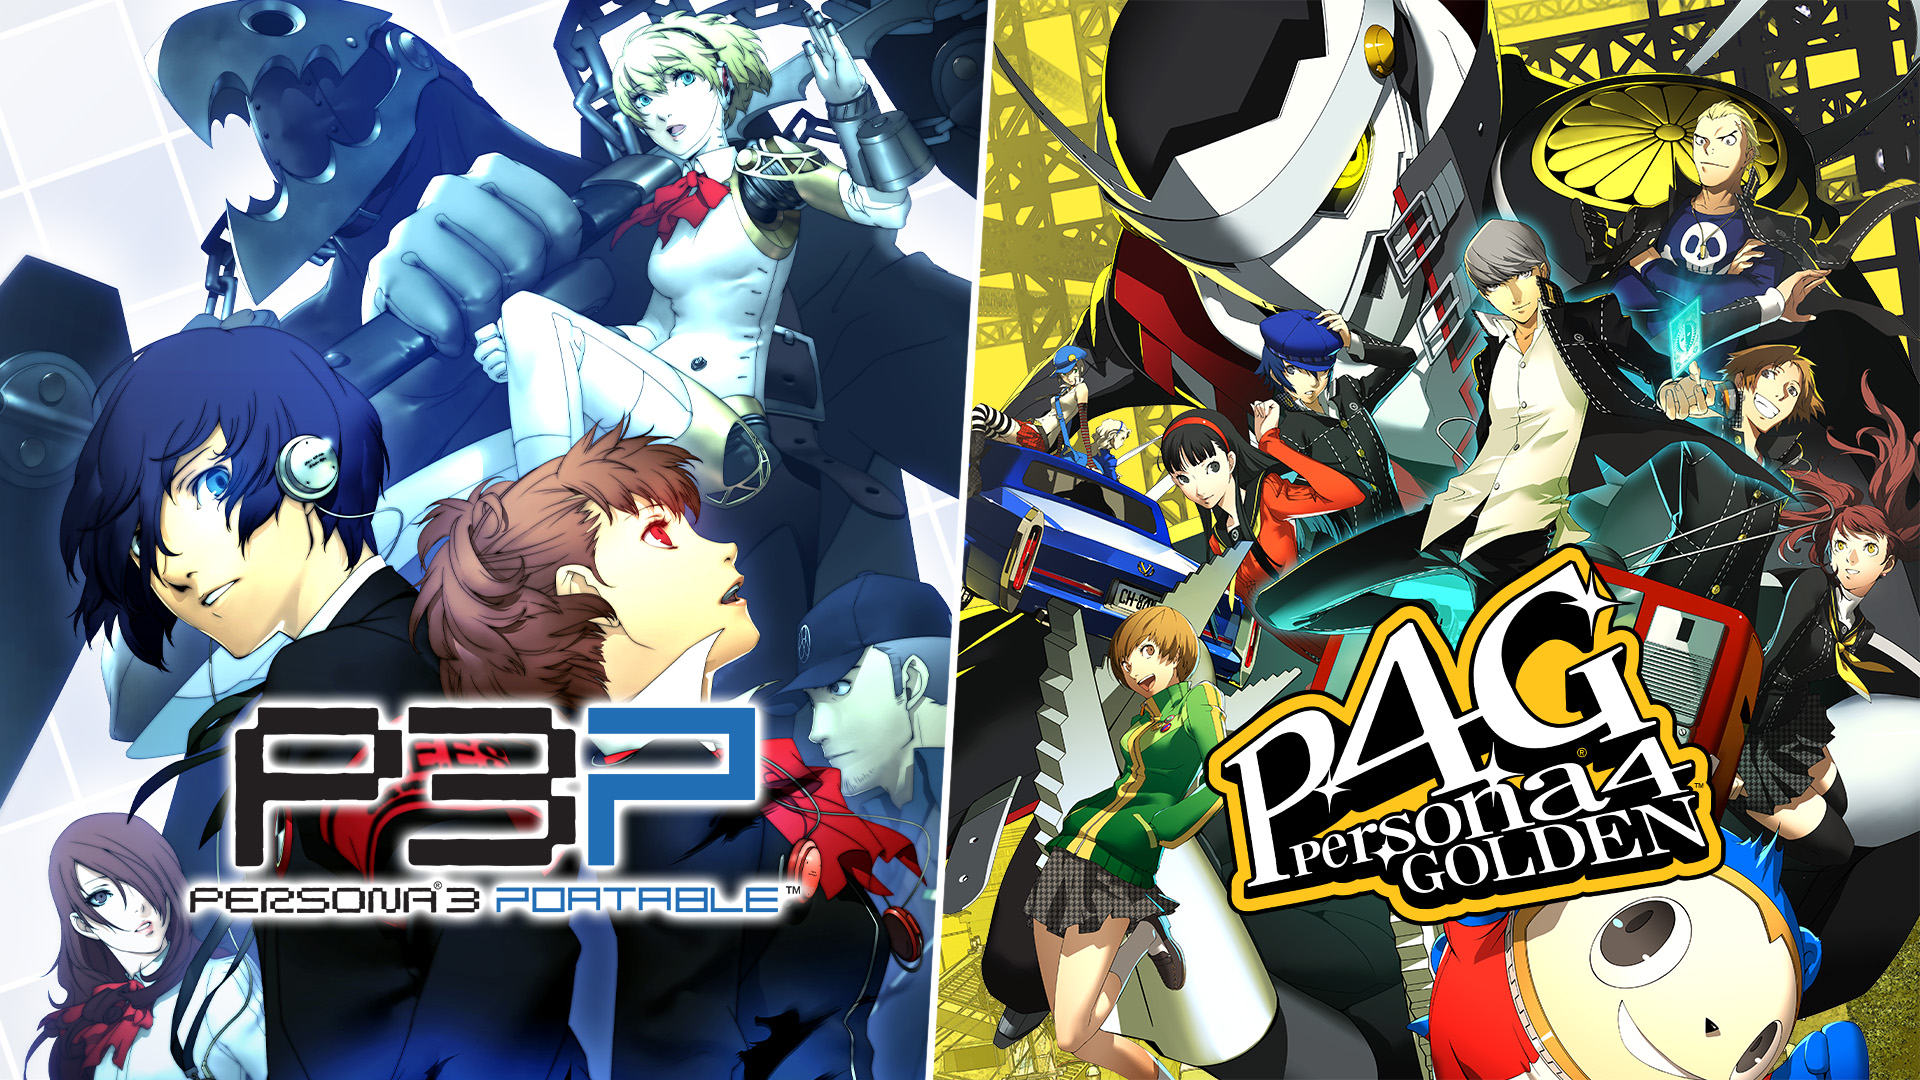 Persona 5 Royal, Persona 4 Golden, Persona 3 Portable releasing on